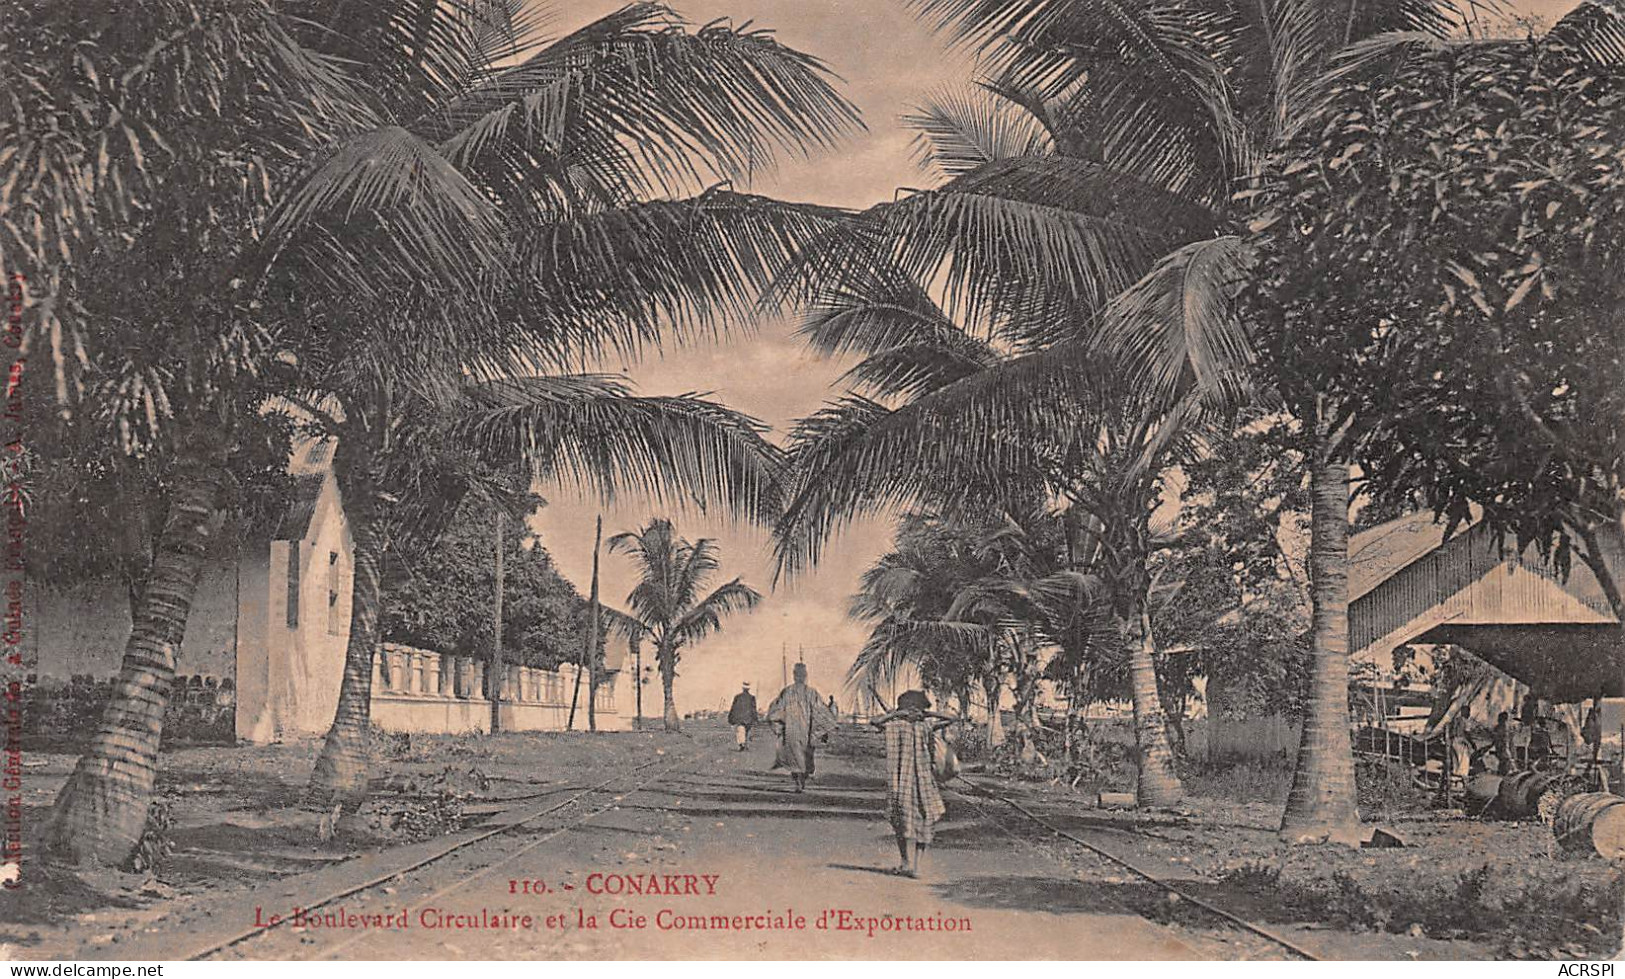 GUINEE Française Conakry Konakry Guinea Boulevard Circulaire Cie Commerciale D'Exportation  (Scans R/V) N° 51 \MO7006 - French Guinea